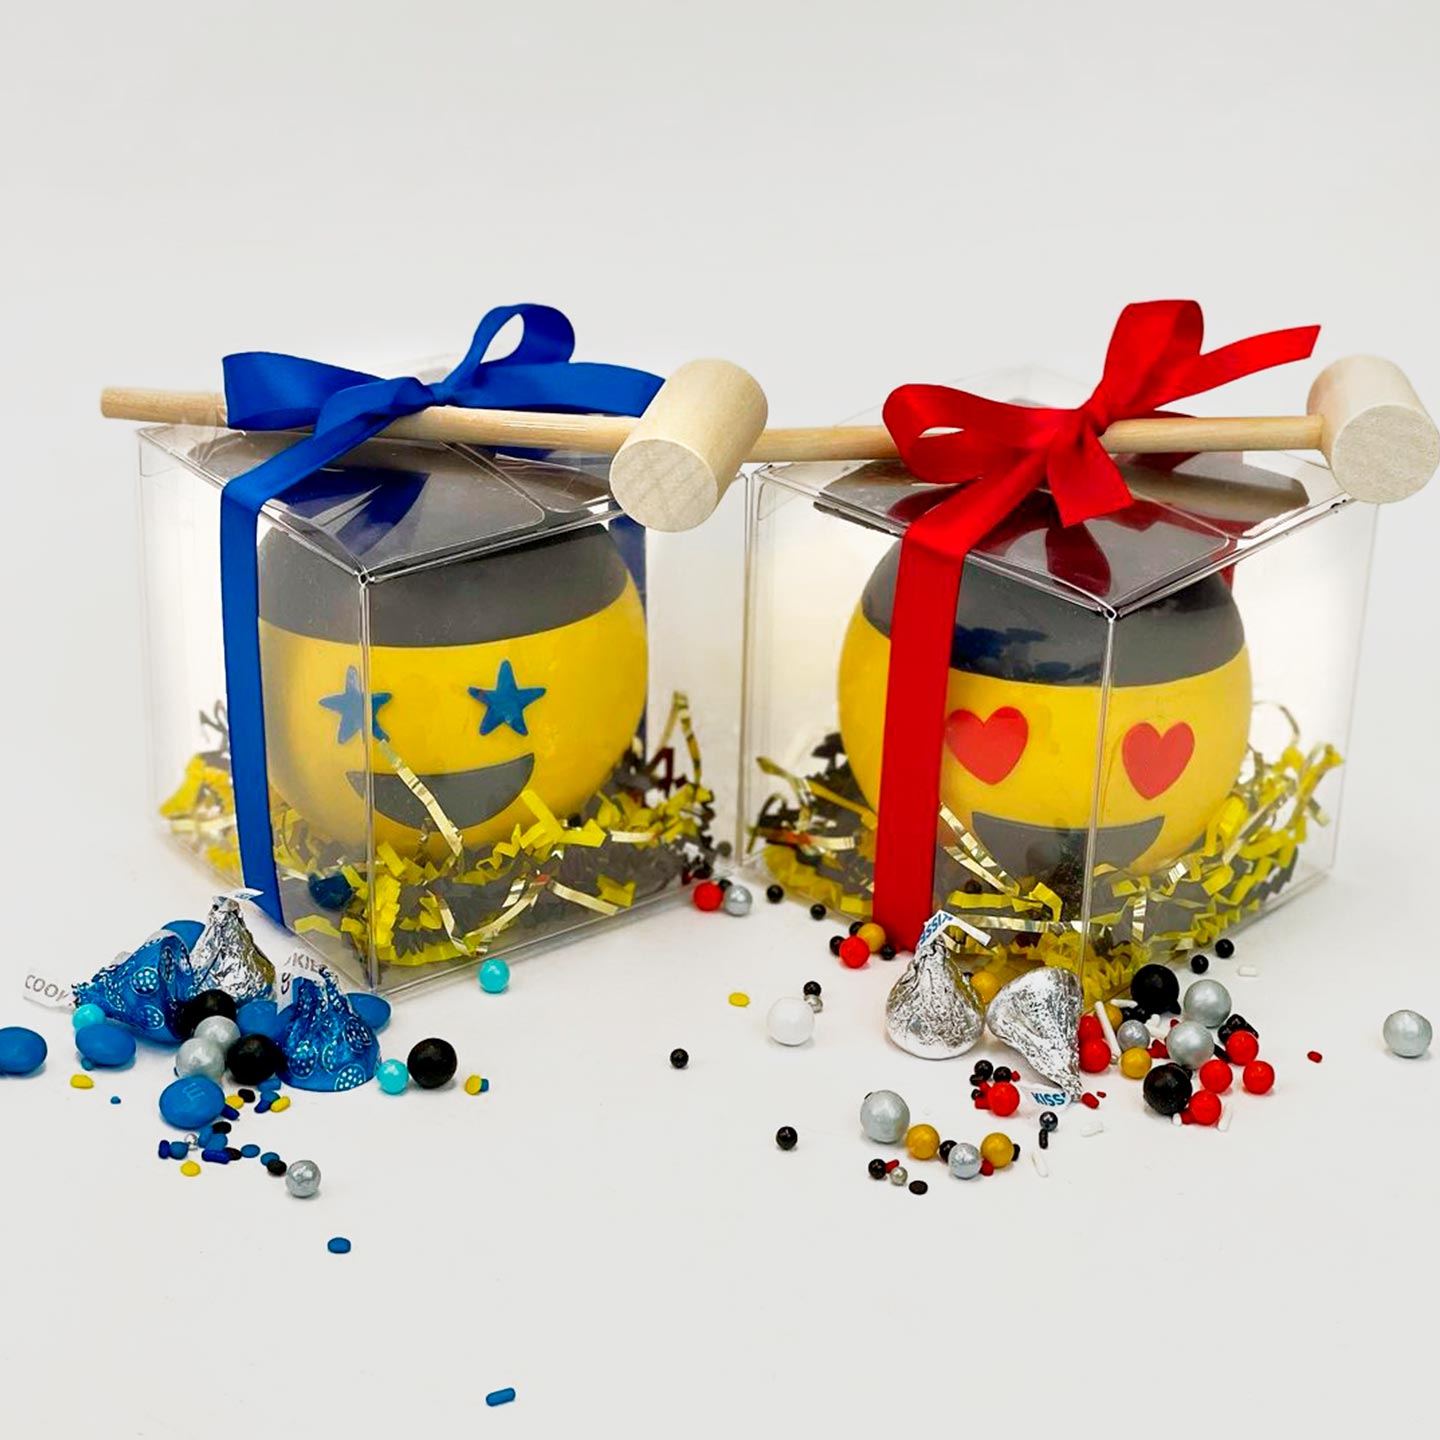 Two chocolate happy faces wearing a graduation cap. Each is in a clear box. The box is wrapped with a bow and a mallet. Assorted candies are spread on the outside to show the content. There are two options: blue and red.